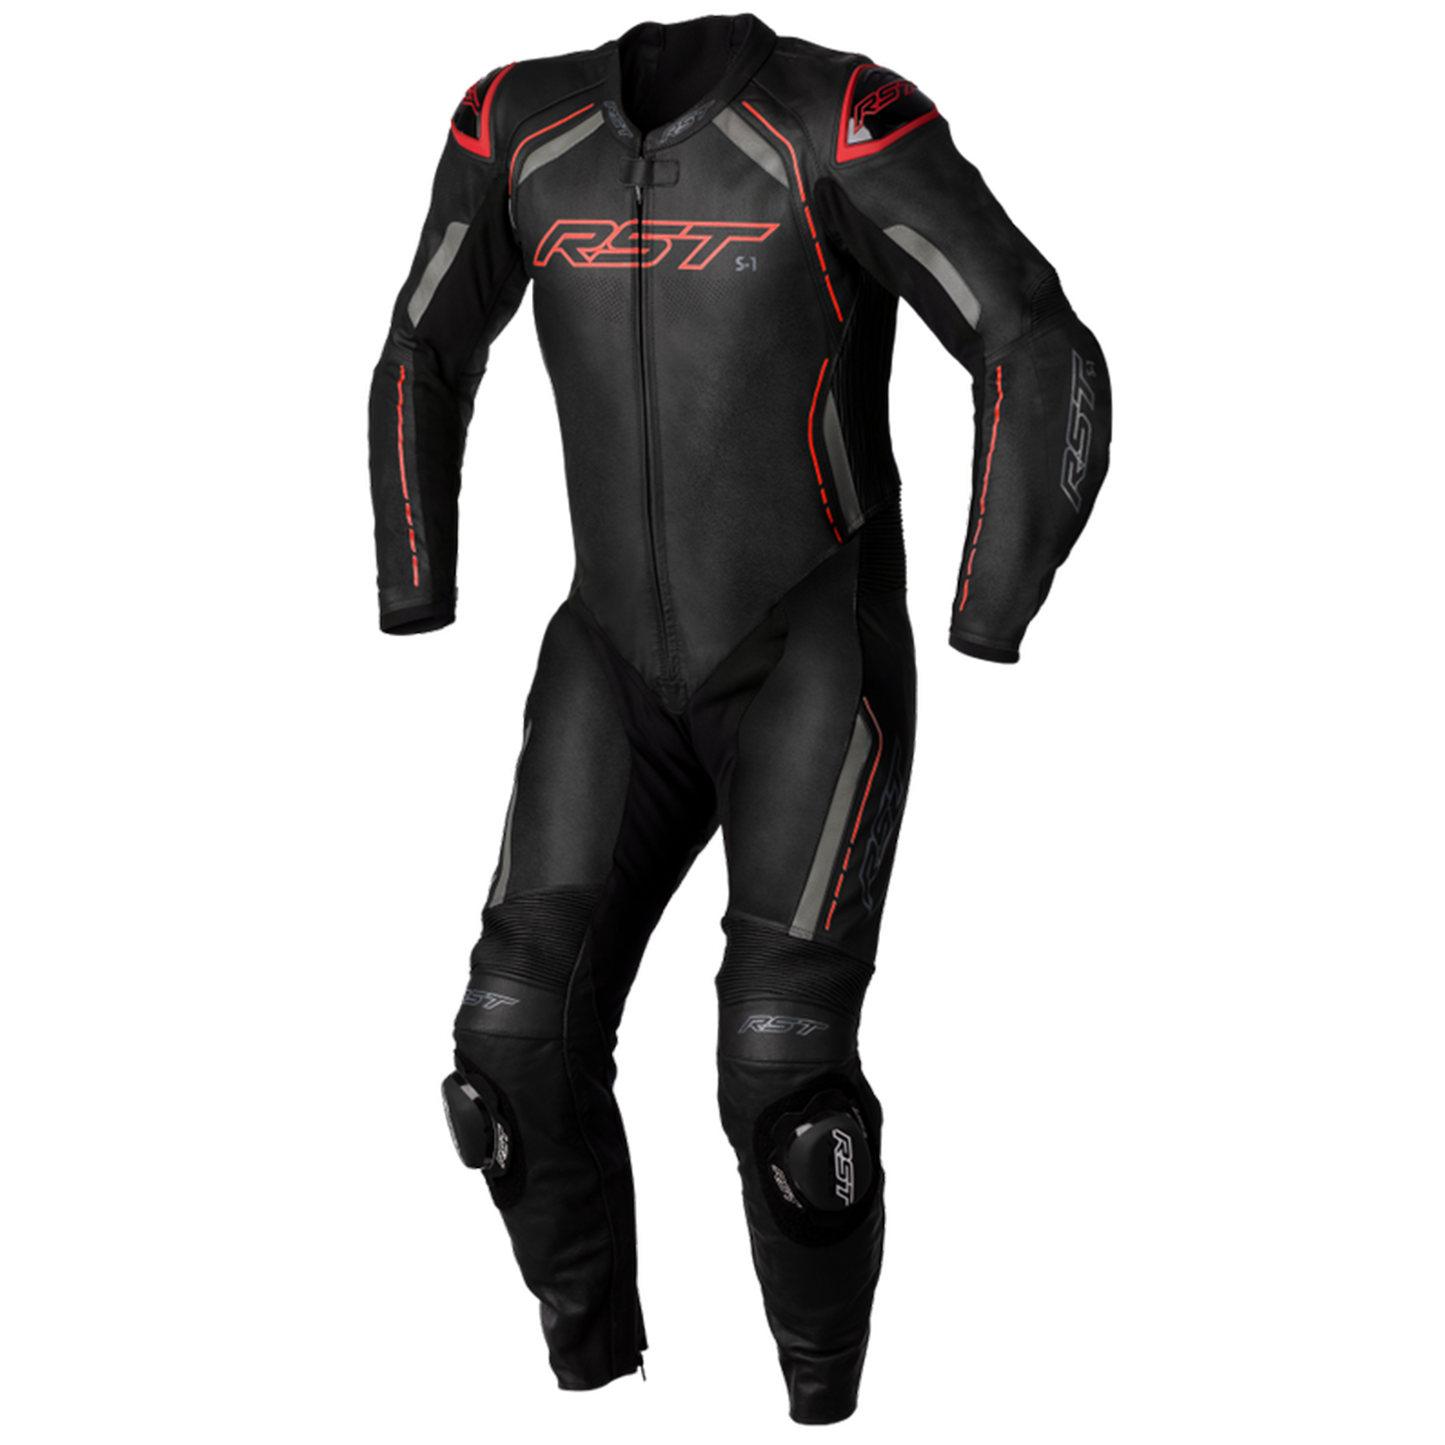 RST S1 Men's One Piece Leather Suit - Black/Grey/Red